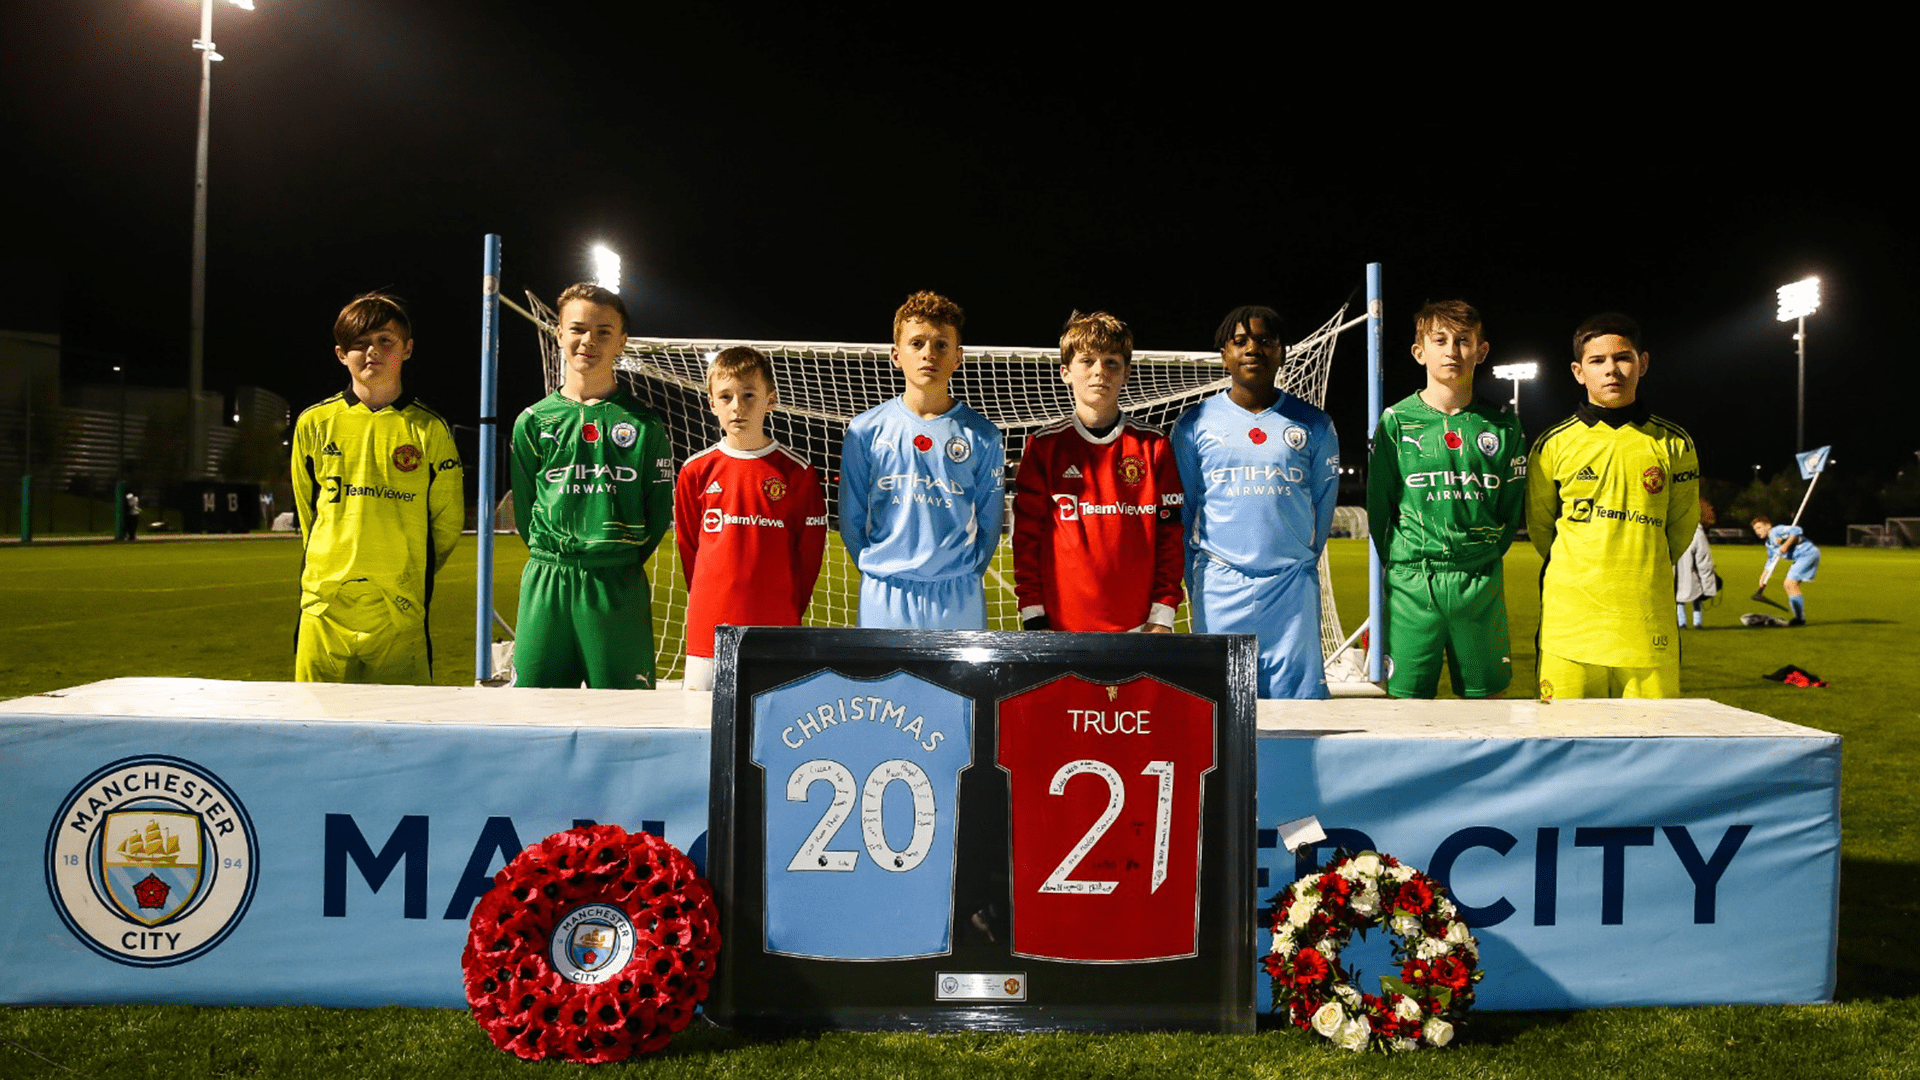 Manchester City and Manchester United Academy players stand together with framed and signed 20 and 21 football shirts marking the year 2021 as part of their special City United / United City truce tournament on 11 November 2021.